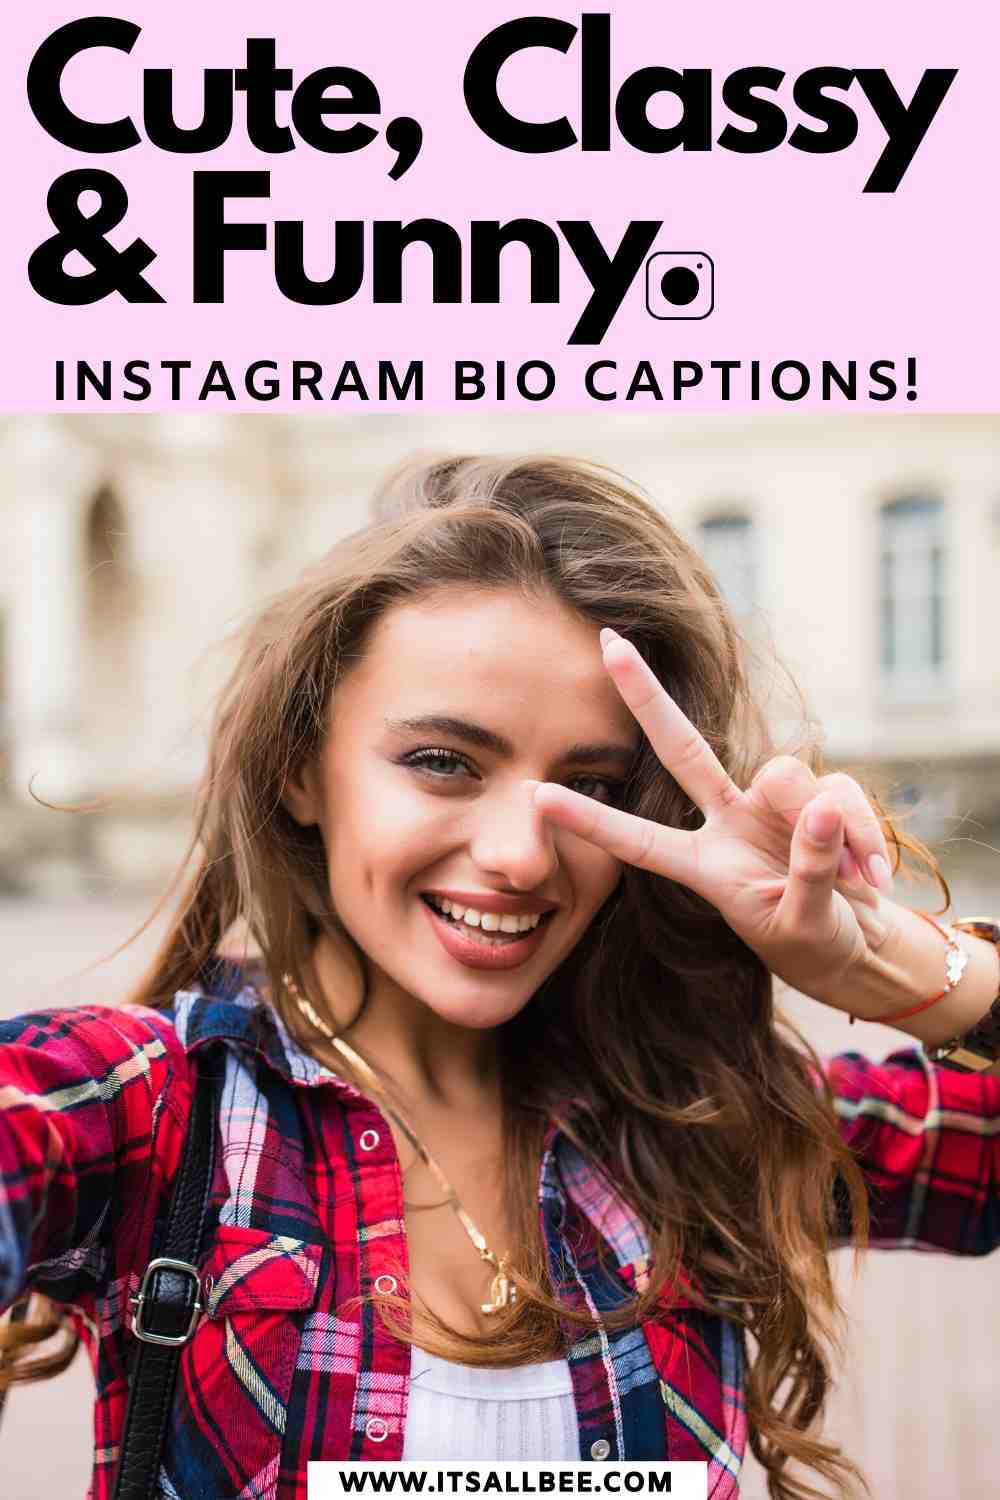 Guide to the best bios for instagram for girls! Cute, classy, funny and sassy 